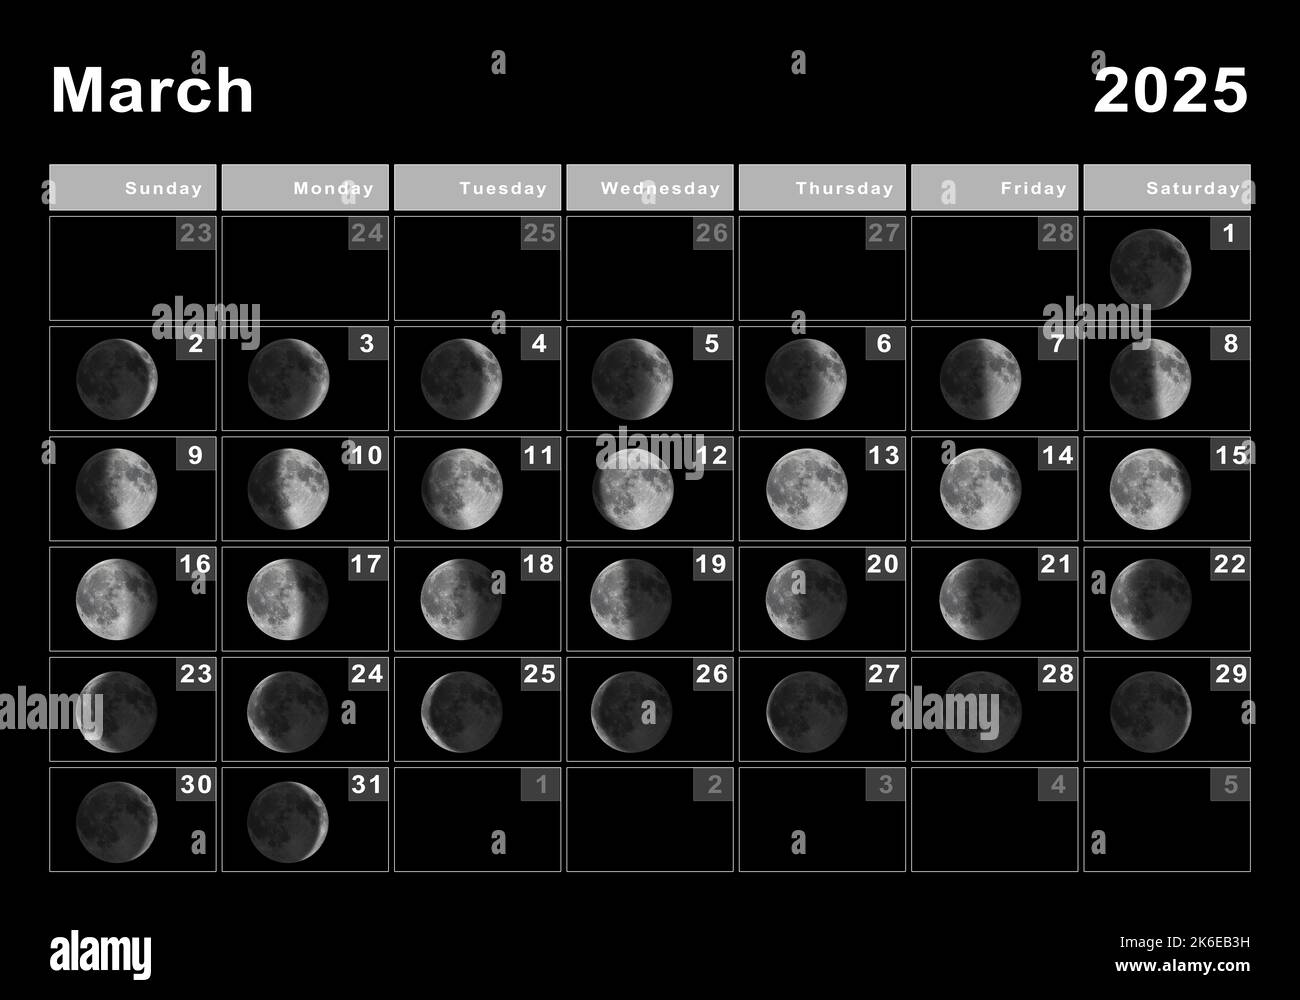 March 2025 Lunar calendar, Moon cycles, Moon Phases Stock Photo Alamy